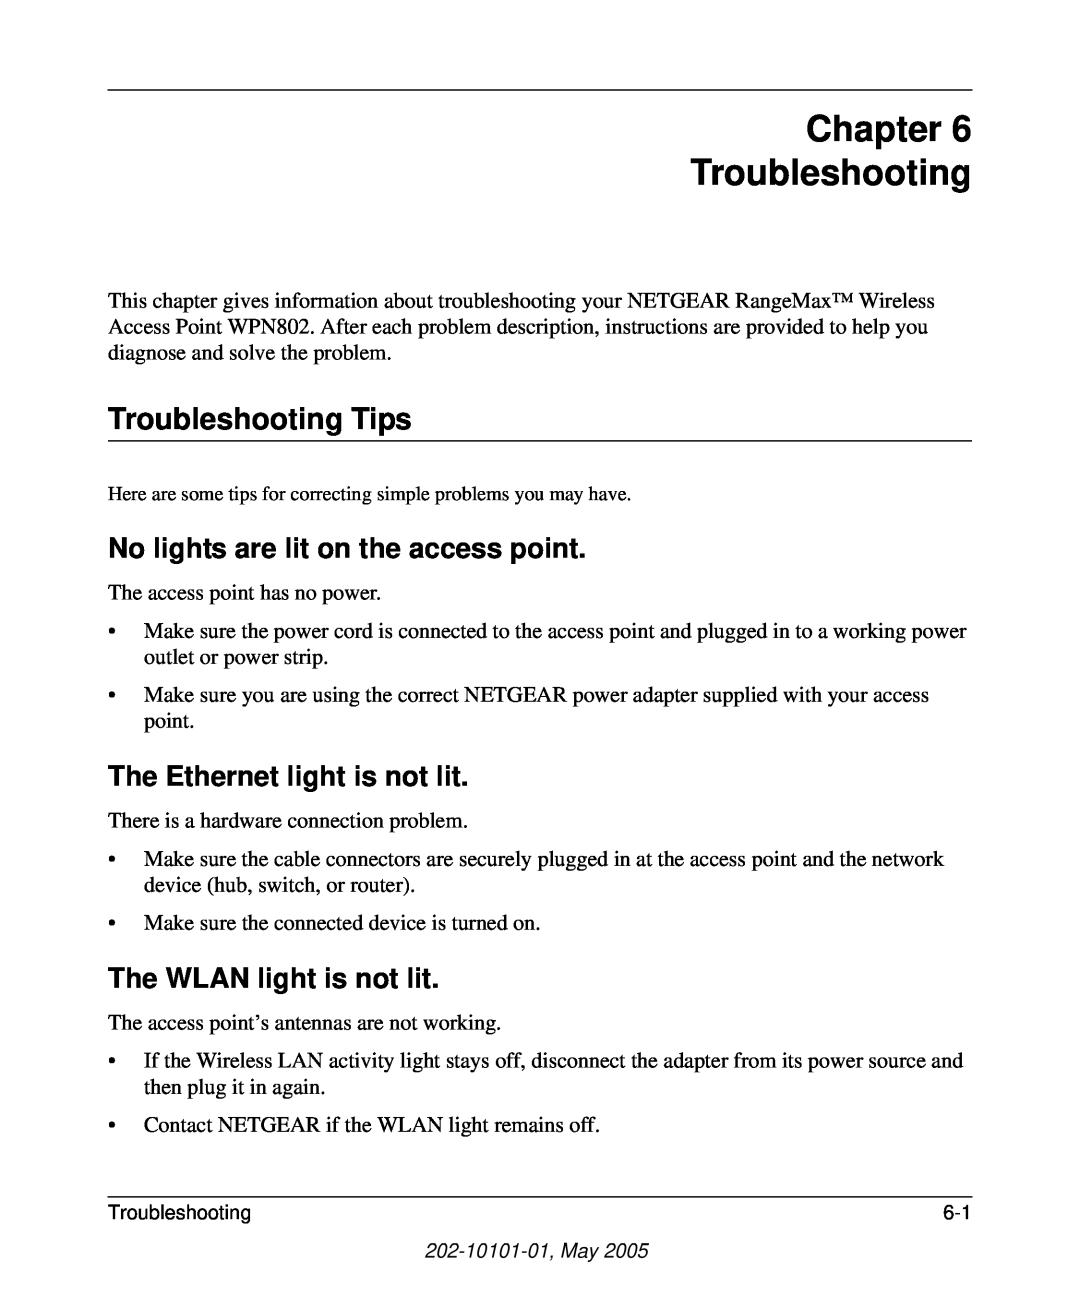 NETGEAR WPN802 manual Chapter Troubleshooting, Troubleshooting Tips, No lights are lit on the access point 